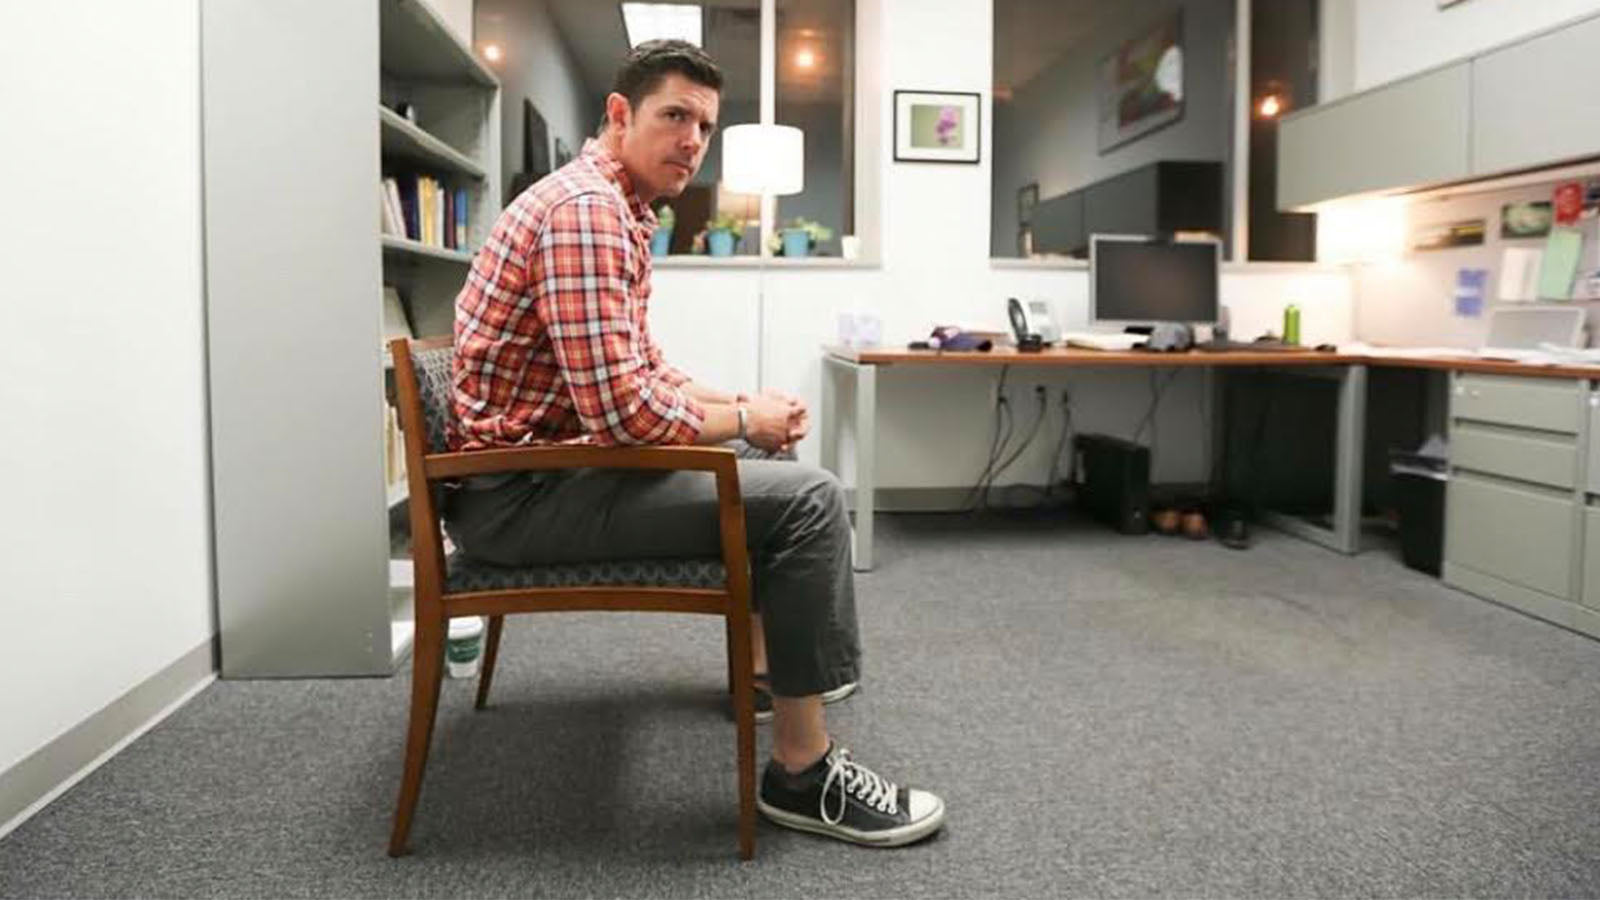 A man in a plaid shirt sits in a chair in an office.